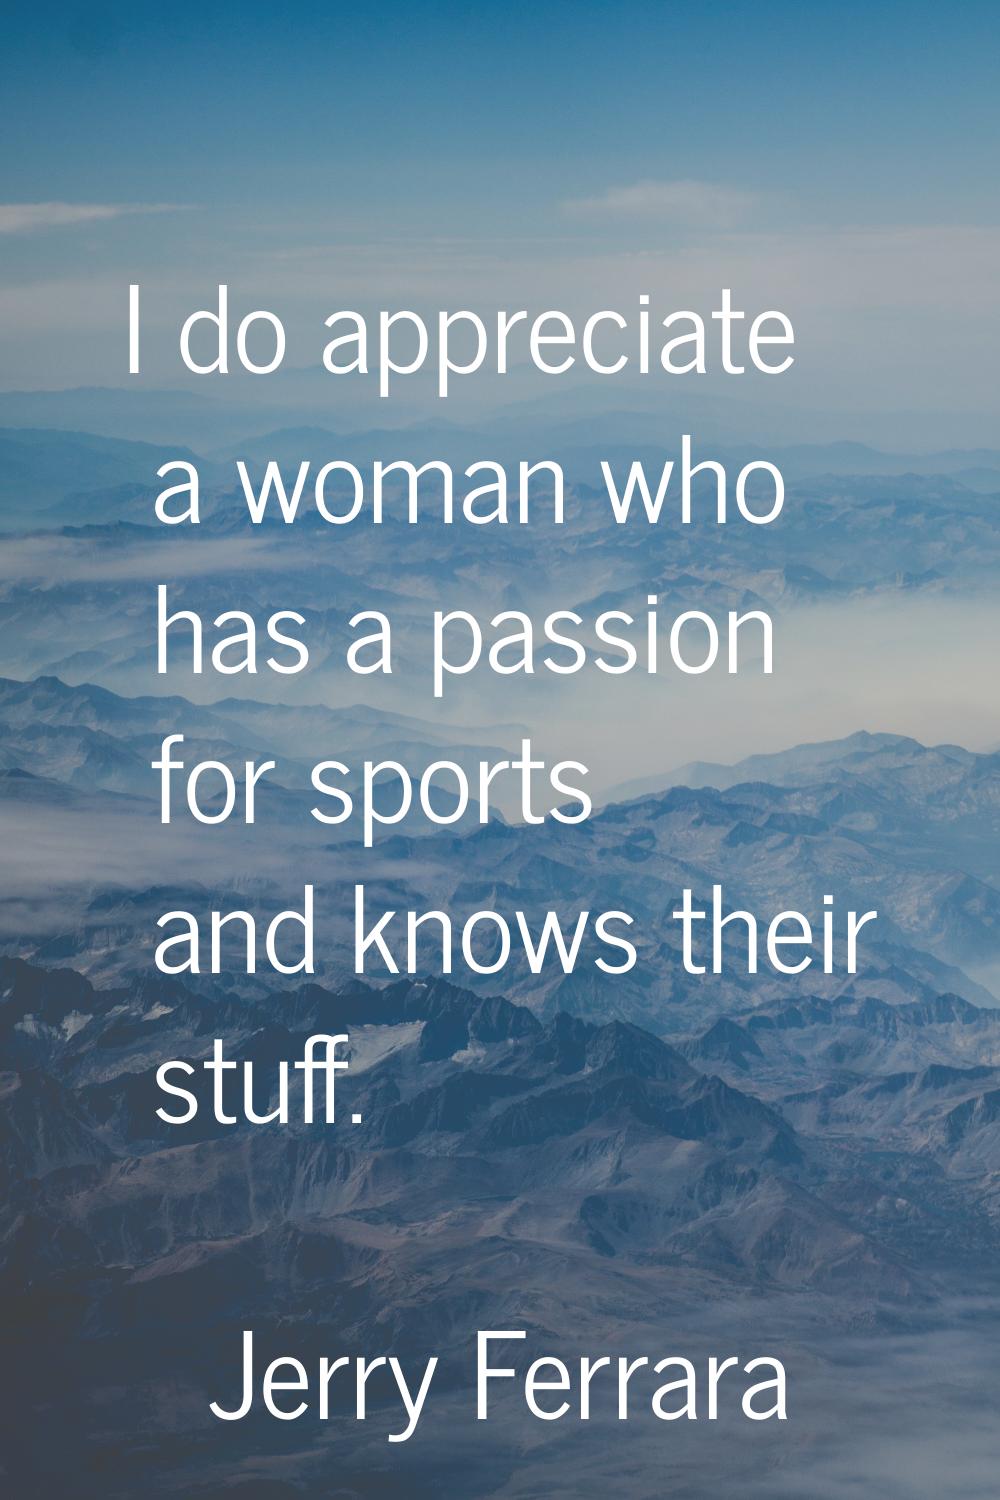 I do appreciate a woman who has a passion for sports and knows their stuff.